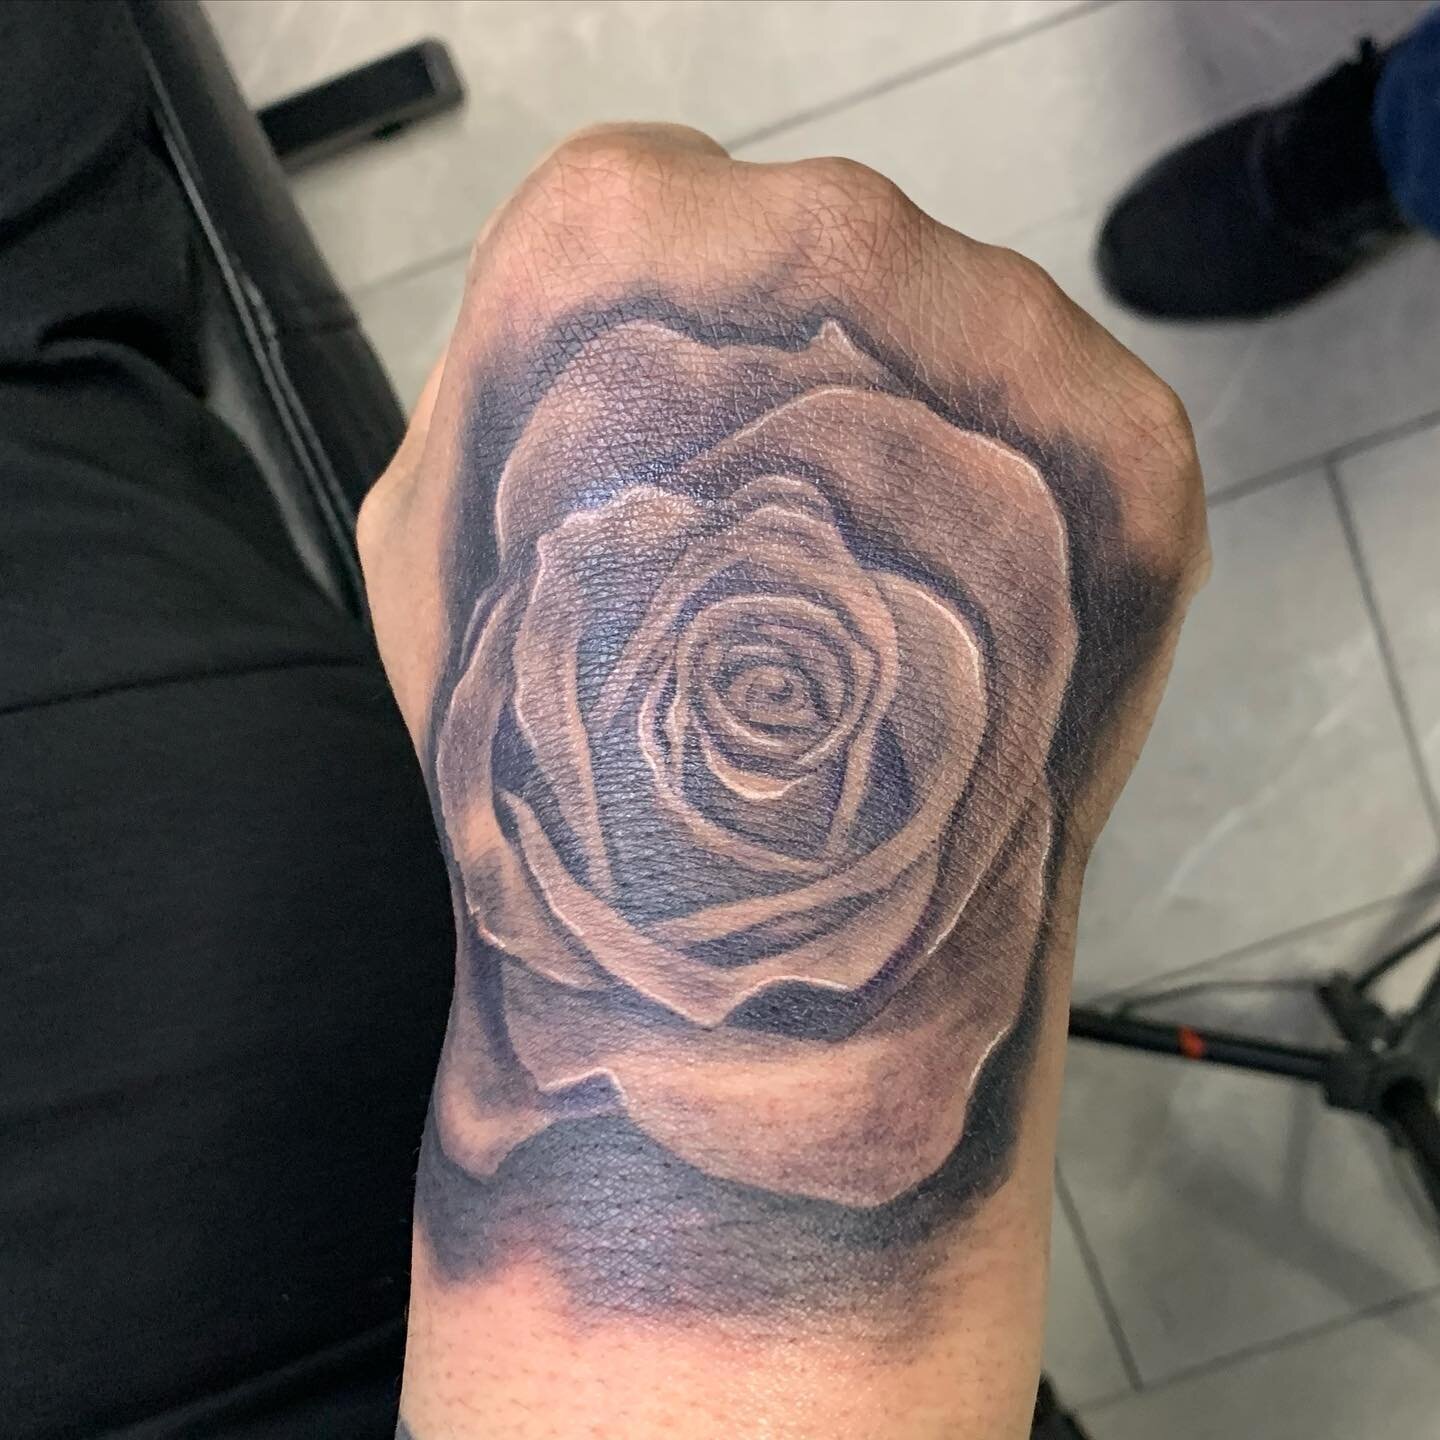 Shout out to @aefons_professor2b for coming all the way from #atlanta for some #ink #tattoo #tattoos #rose #rosetattoo #blackandgreytattoo #blackandgrey #houston #houstontx ##houstontattooartist #slangingink